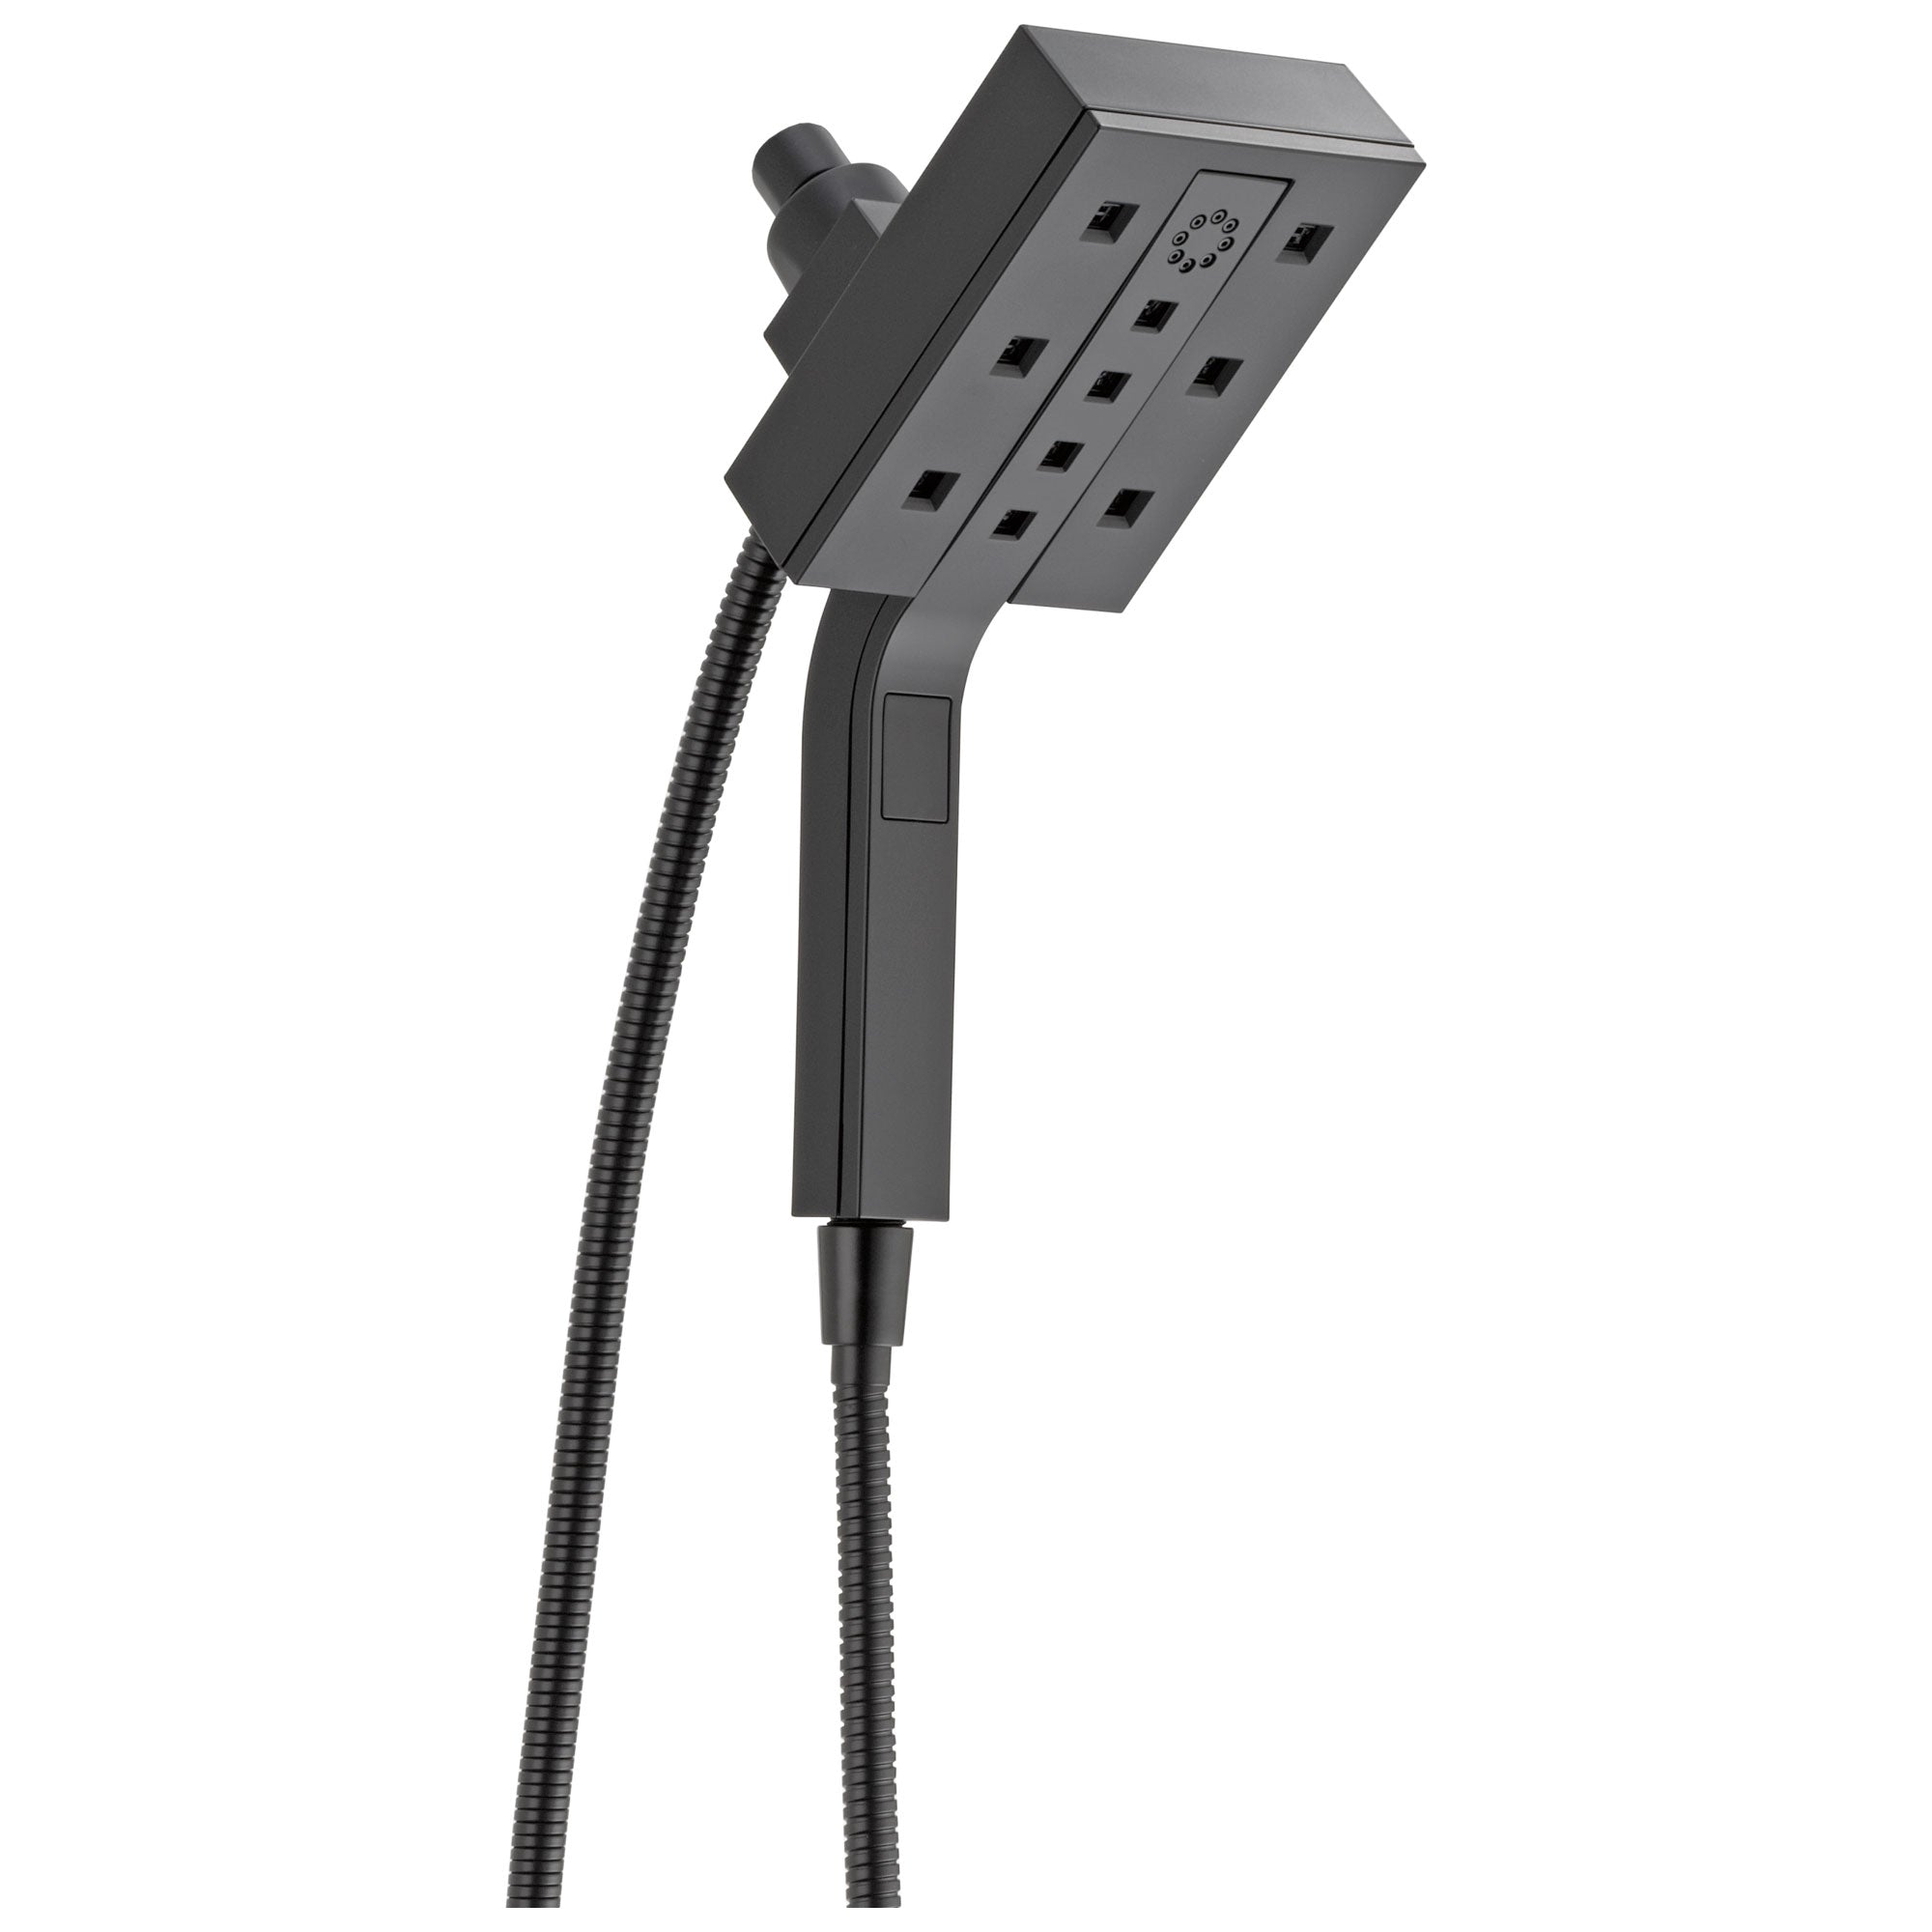 Delta Universal Showering Components Matte Black Finish Modern 4-Setting Shower Arm Mount Two-in-One Hand Shower and Showerhead Combination D58473BL